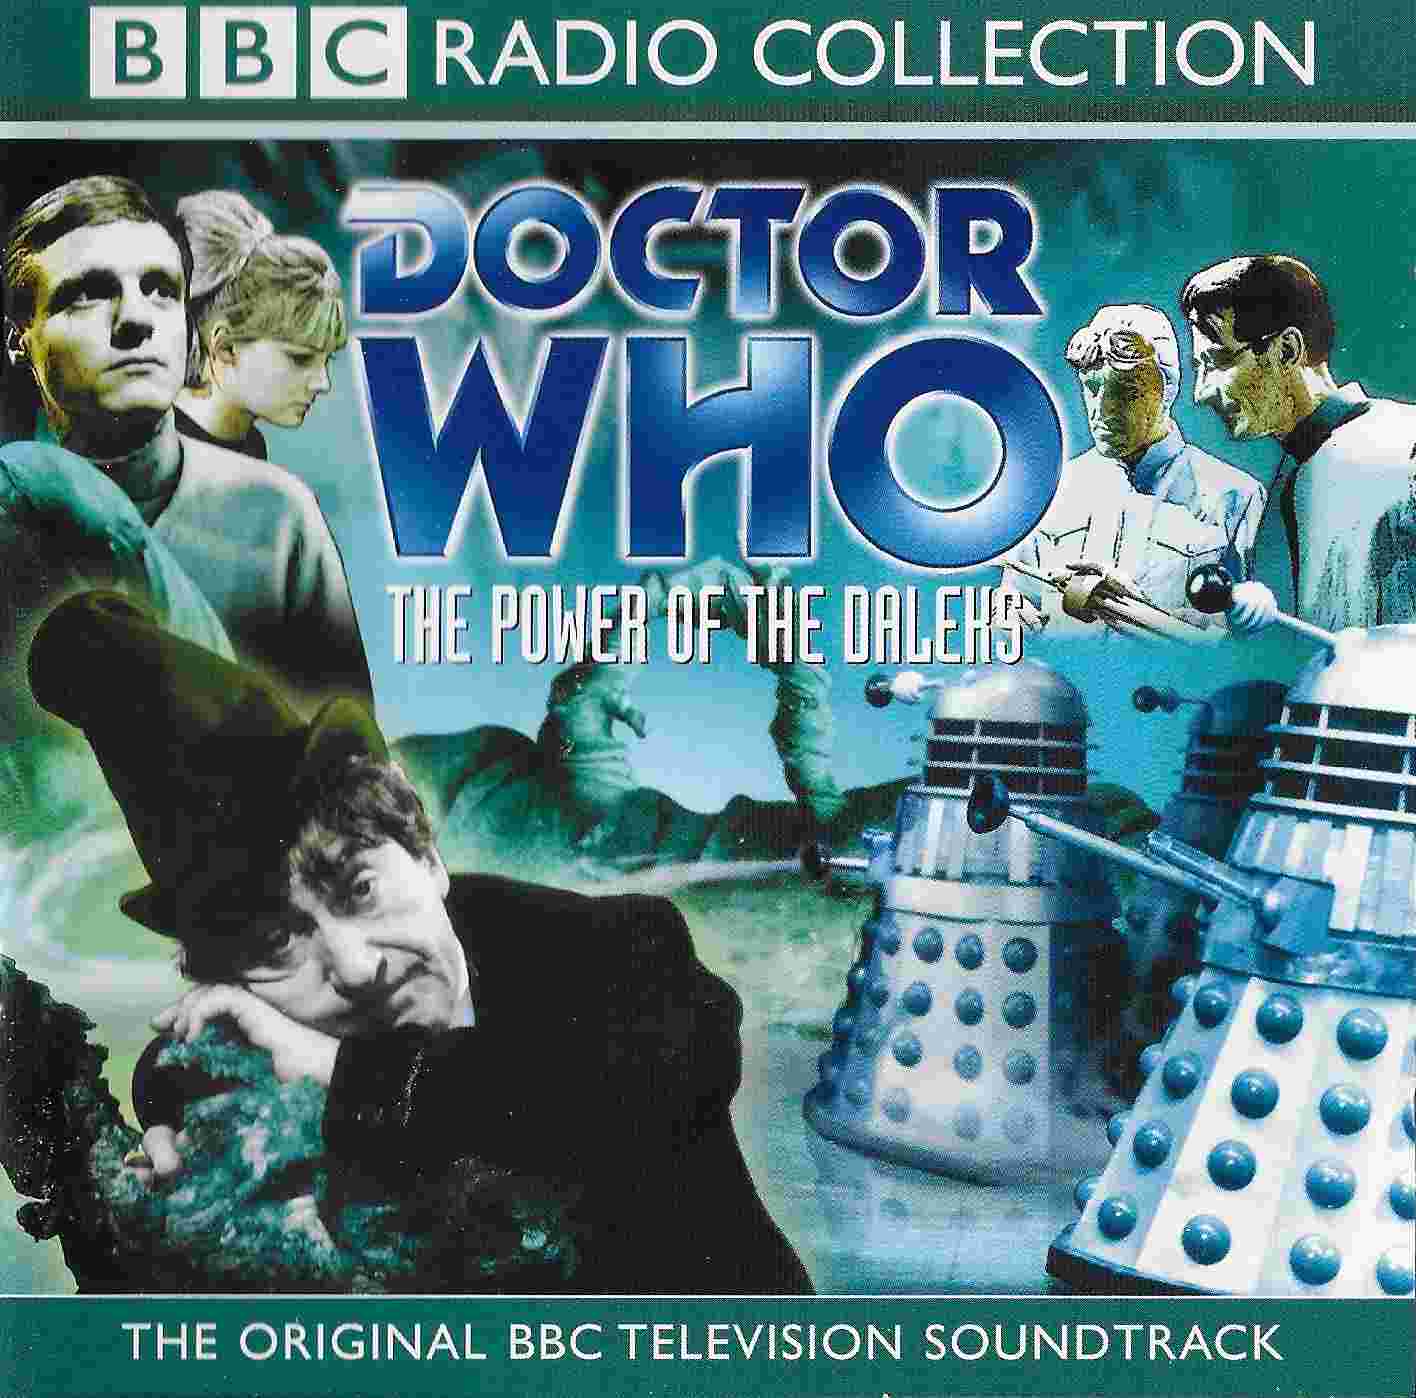 Picture of Doctor Who - The power of the Daleks by artist David Whitaker from the BBC cds - Records and Tapes library